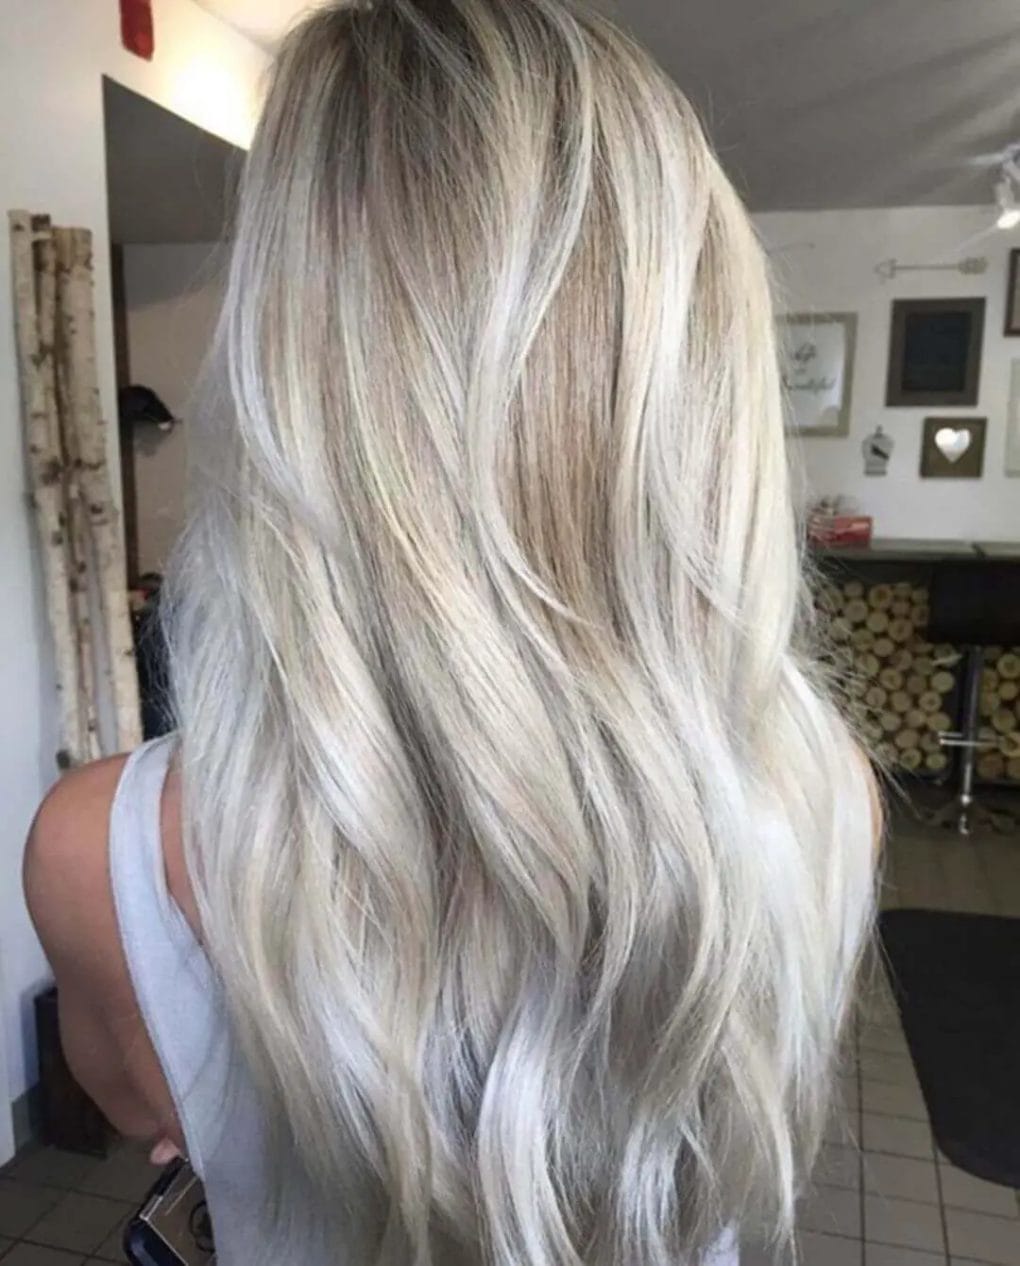 A woman's hairstyle featuring a harmonious blend of platinum and ashy gray highlights, with effortlessly flowing cascading layers softly tousled for natural volume and movement.